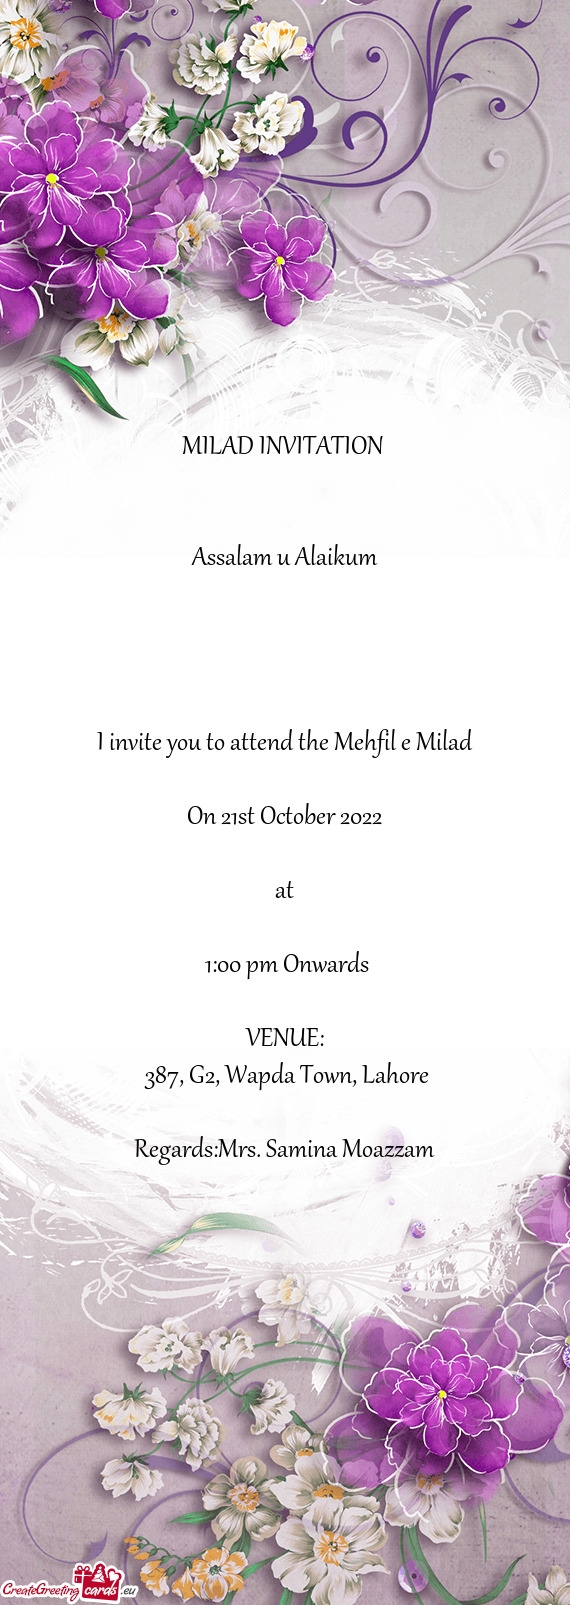 I invite you to attend the Mehfil e Milad